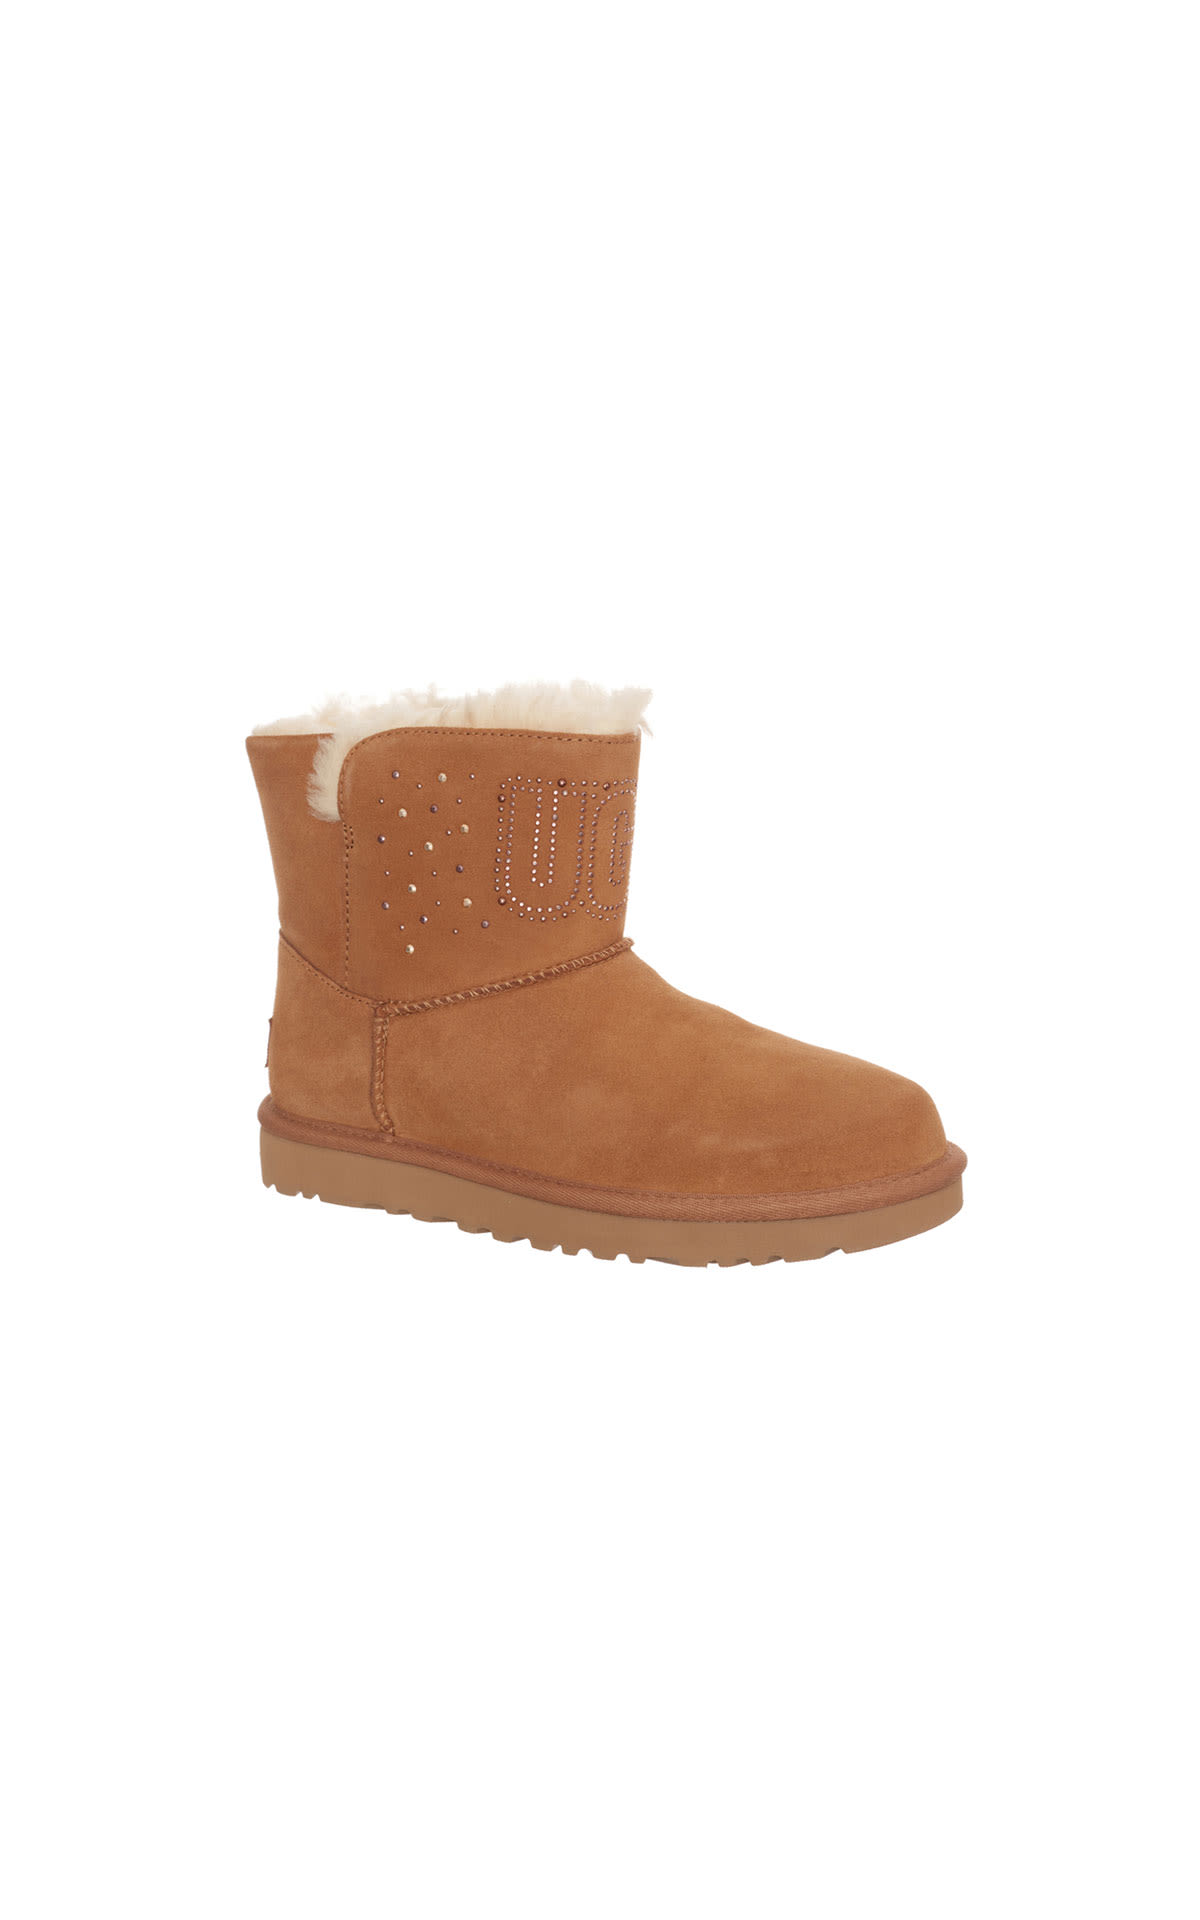 Ugg Classic Ugg from Bicester Village